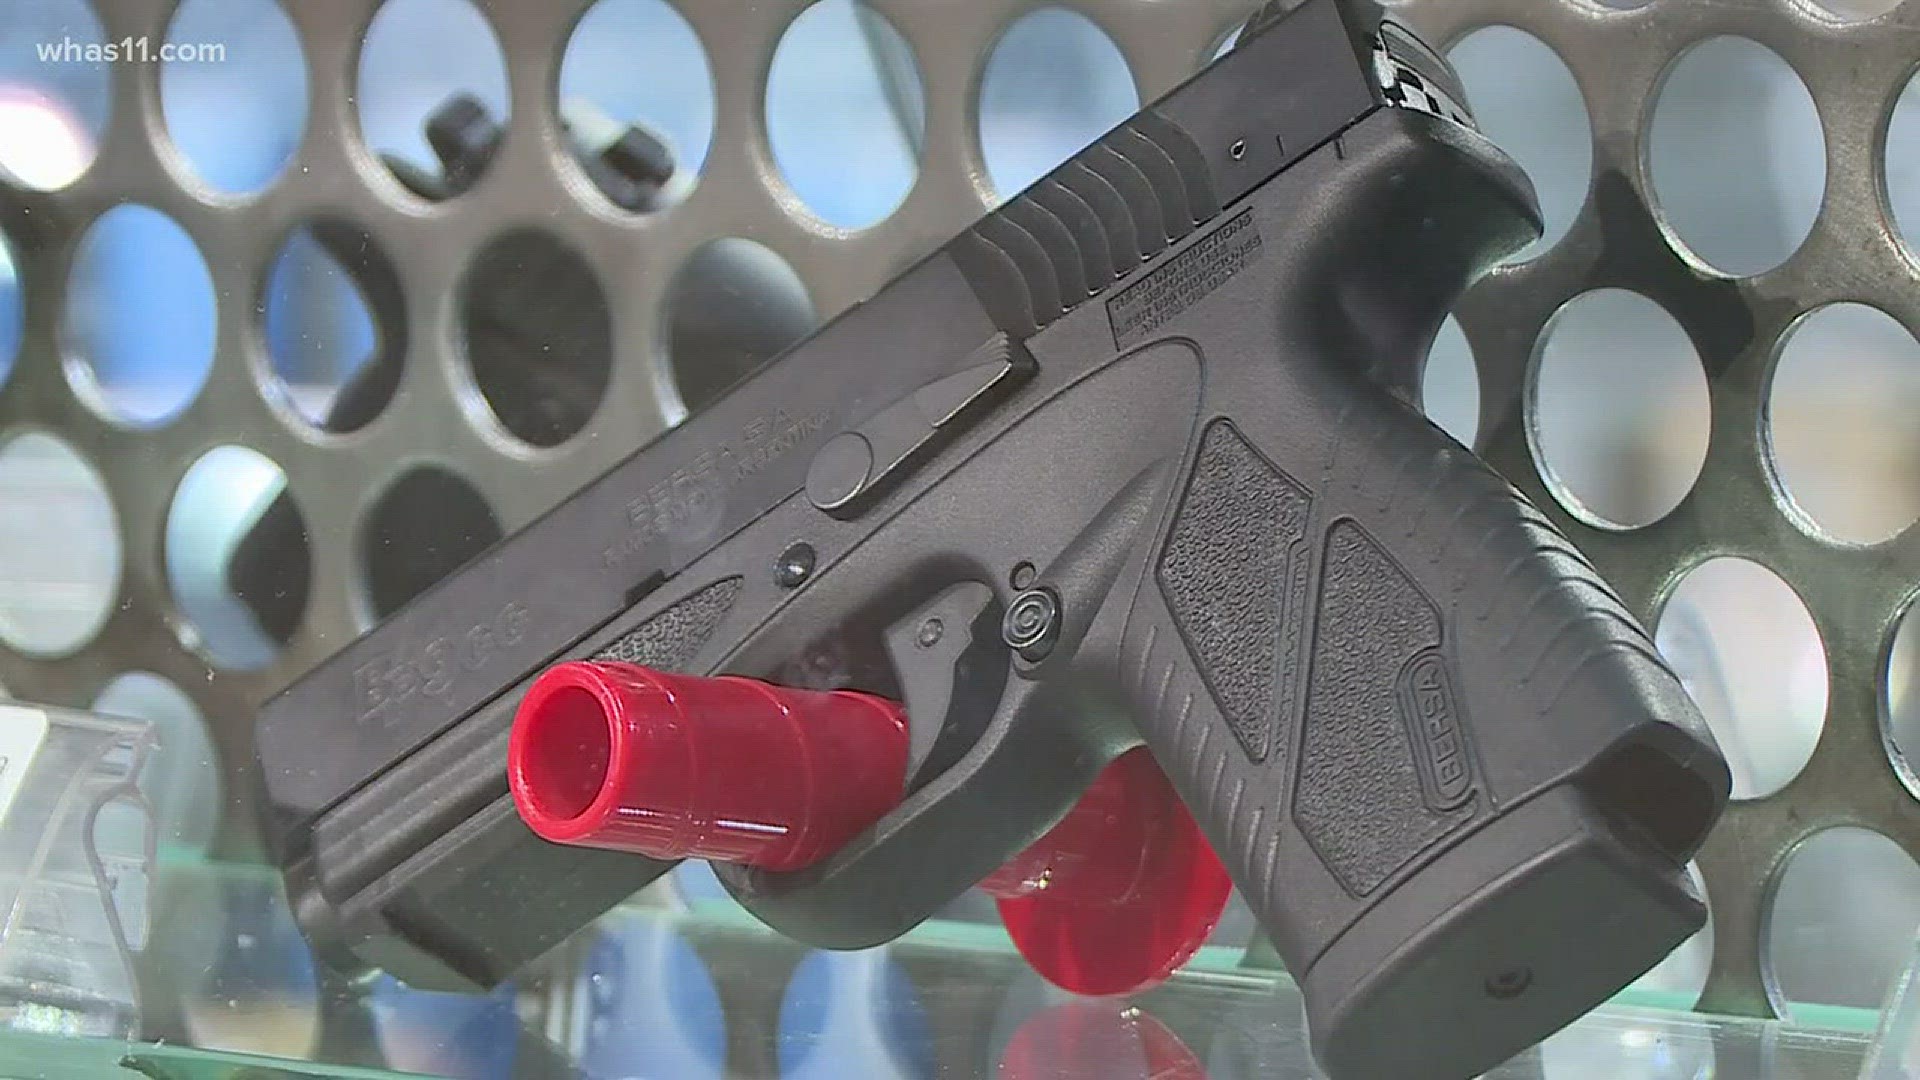 A teacher rally against gun-related bills will take place Wednesday evening at 5:30 at Jefferson Square Park